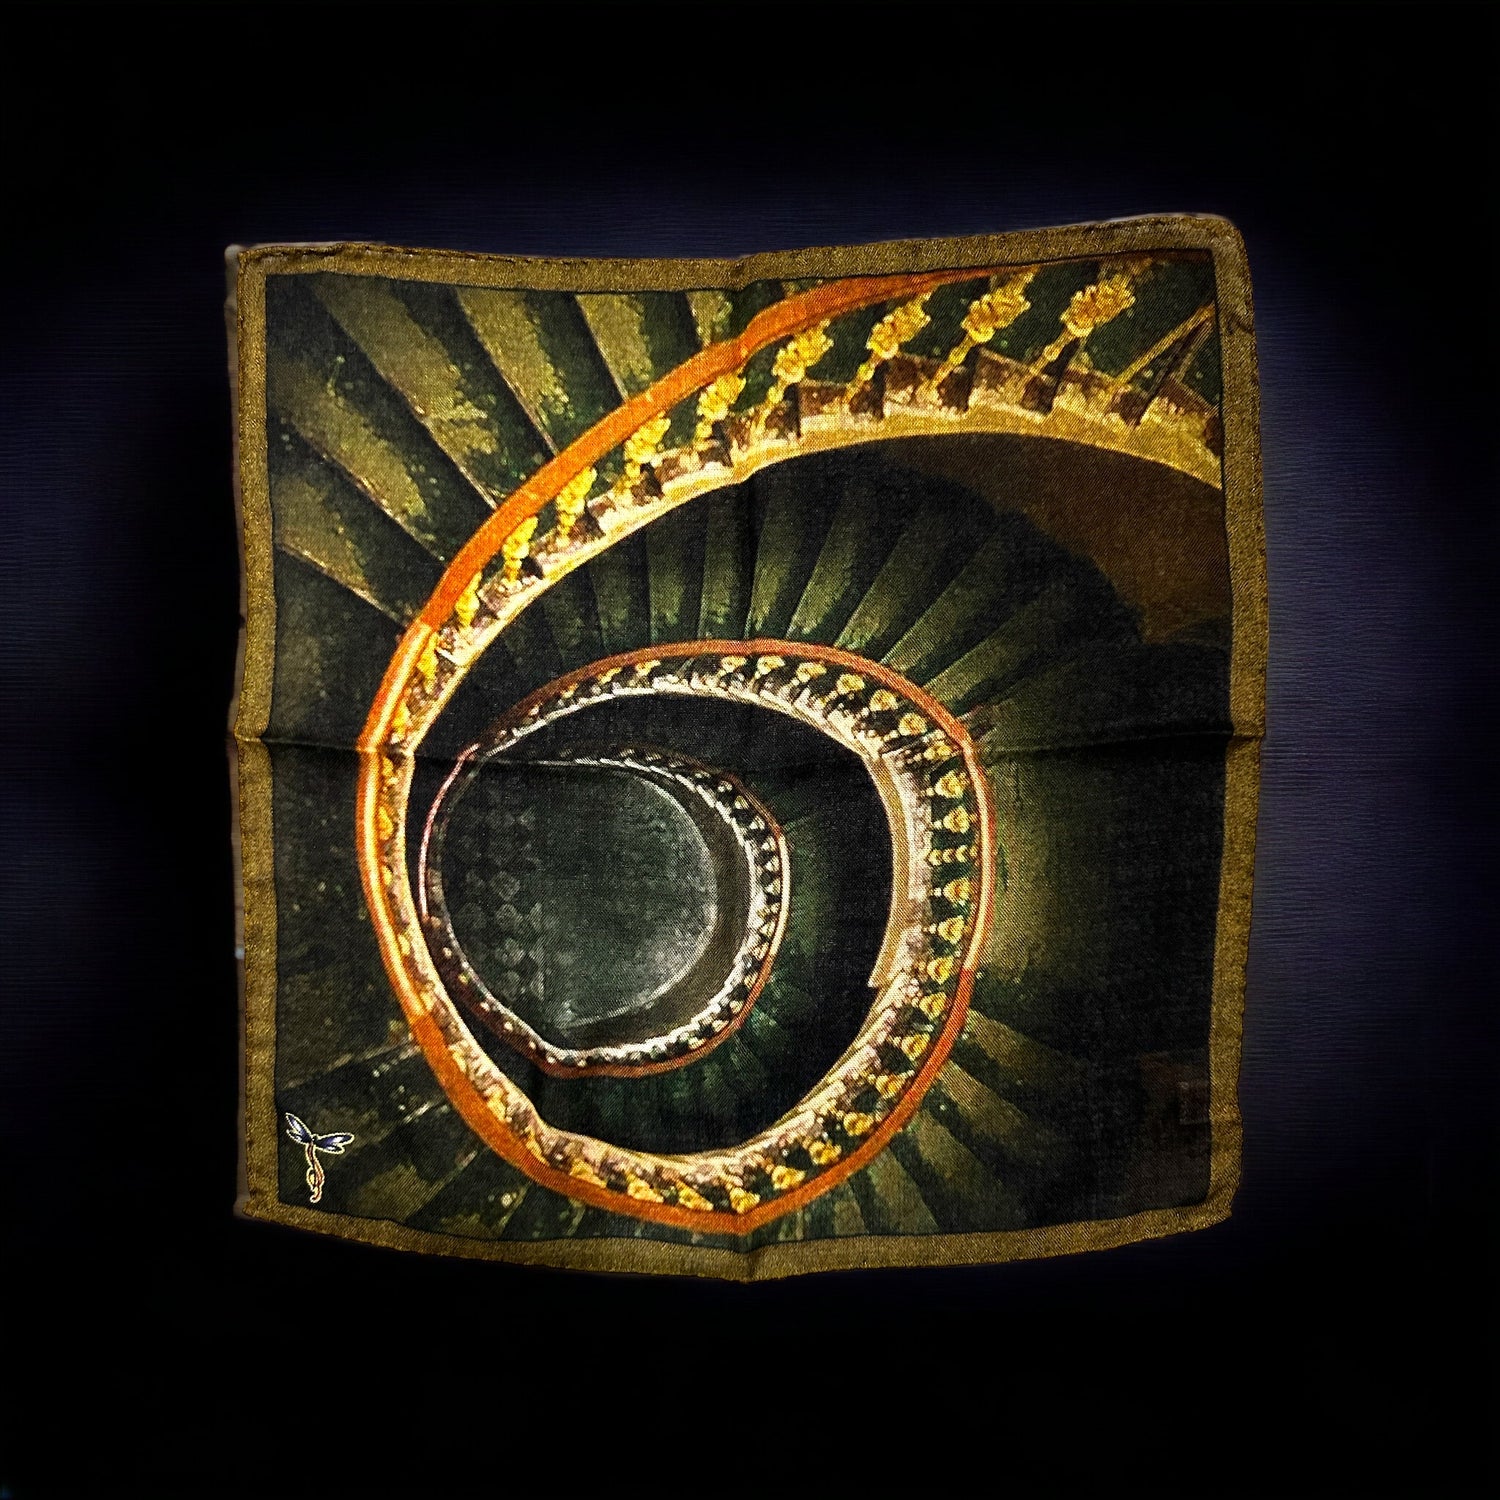 A beautiful representation in a silk pocket square of the spiral staircase located at the Vatican Museum in Rome, Italy. The spiral staircase is called the Bramante Staircase, and it was designed by Donato Bramante in 1505.